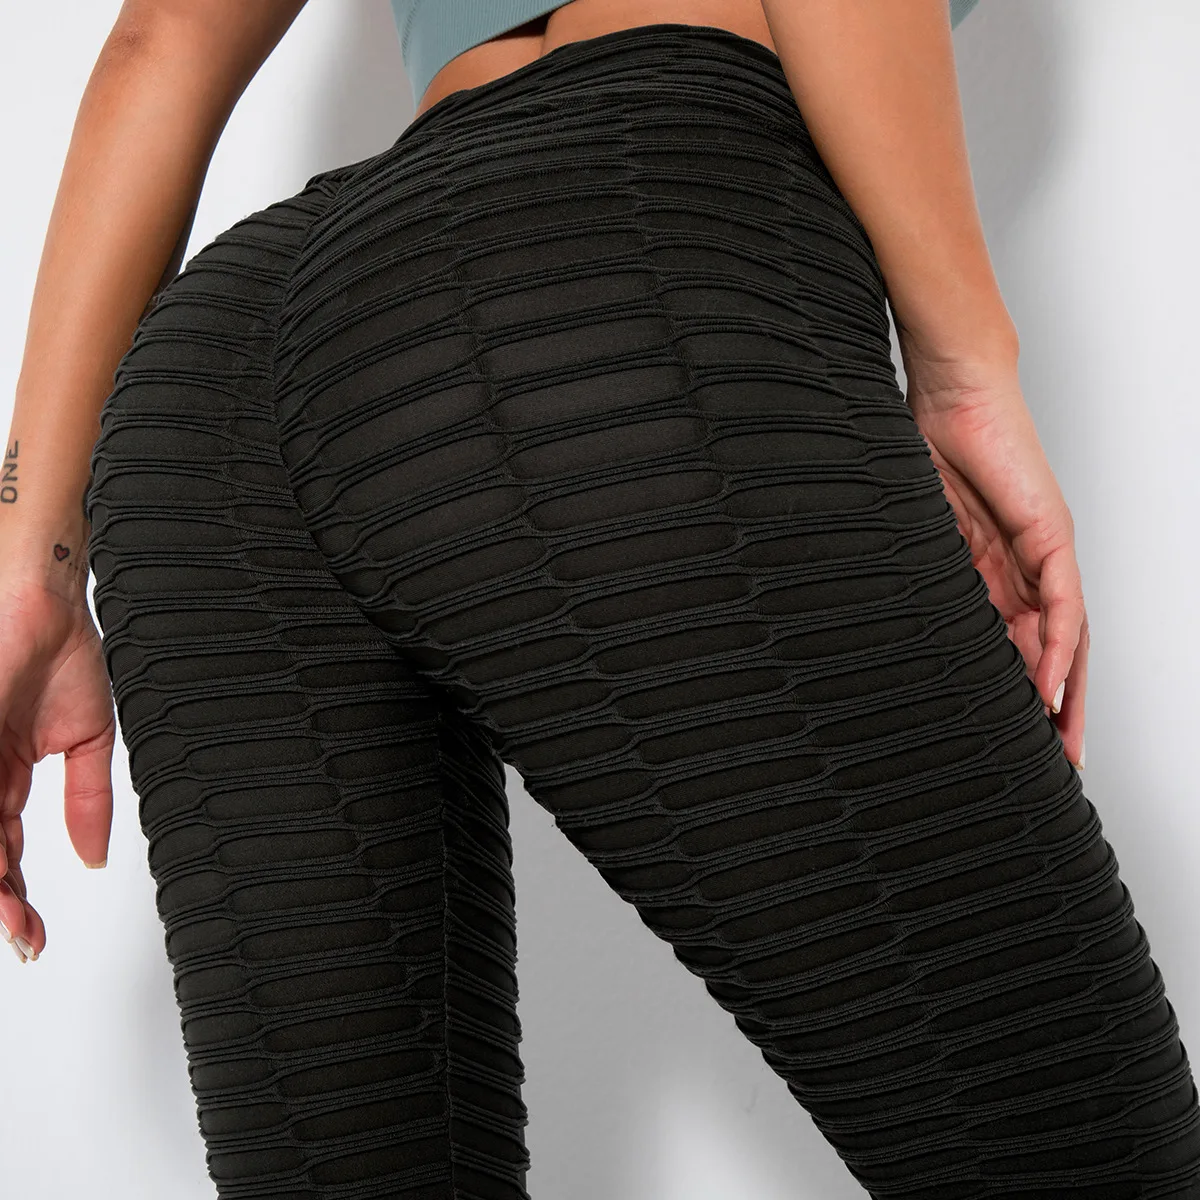 

Women's Ruched Butt Lifting High Waist Yoga Pants Tummy Control Stretchy Workout Leggings Textured Booty Tights